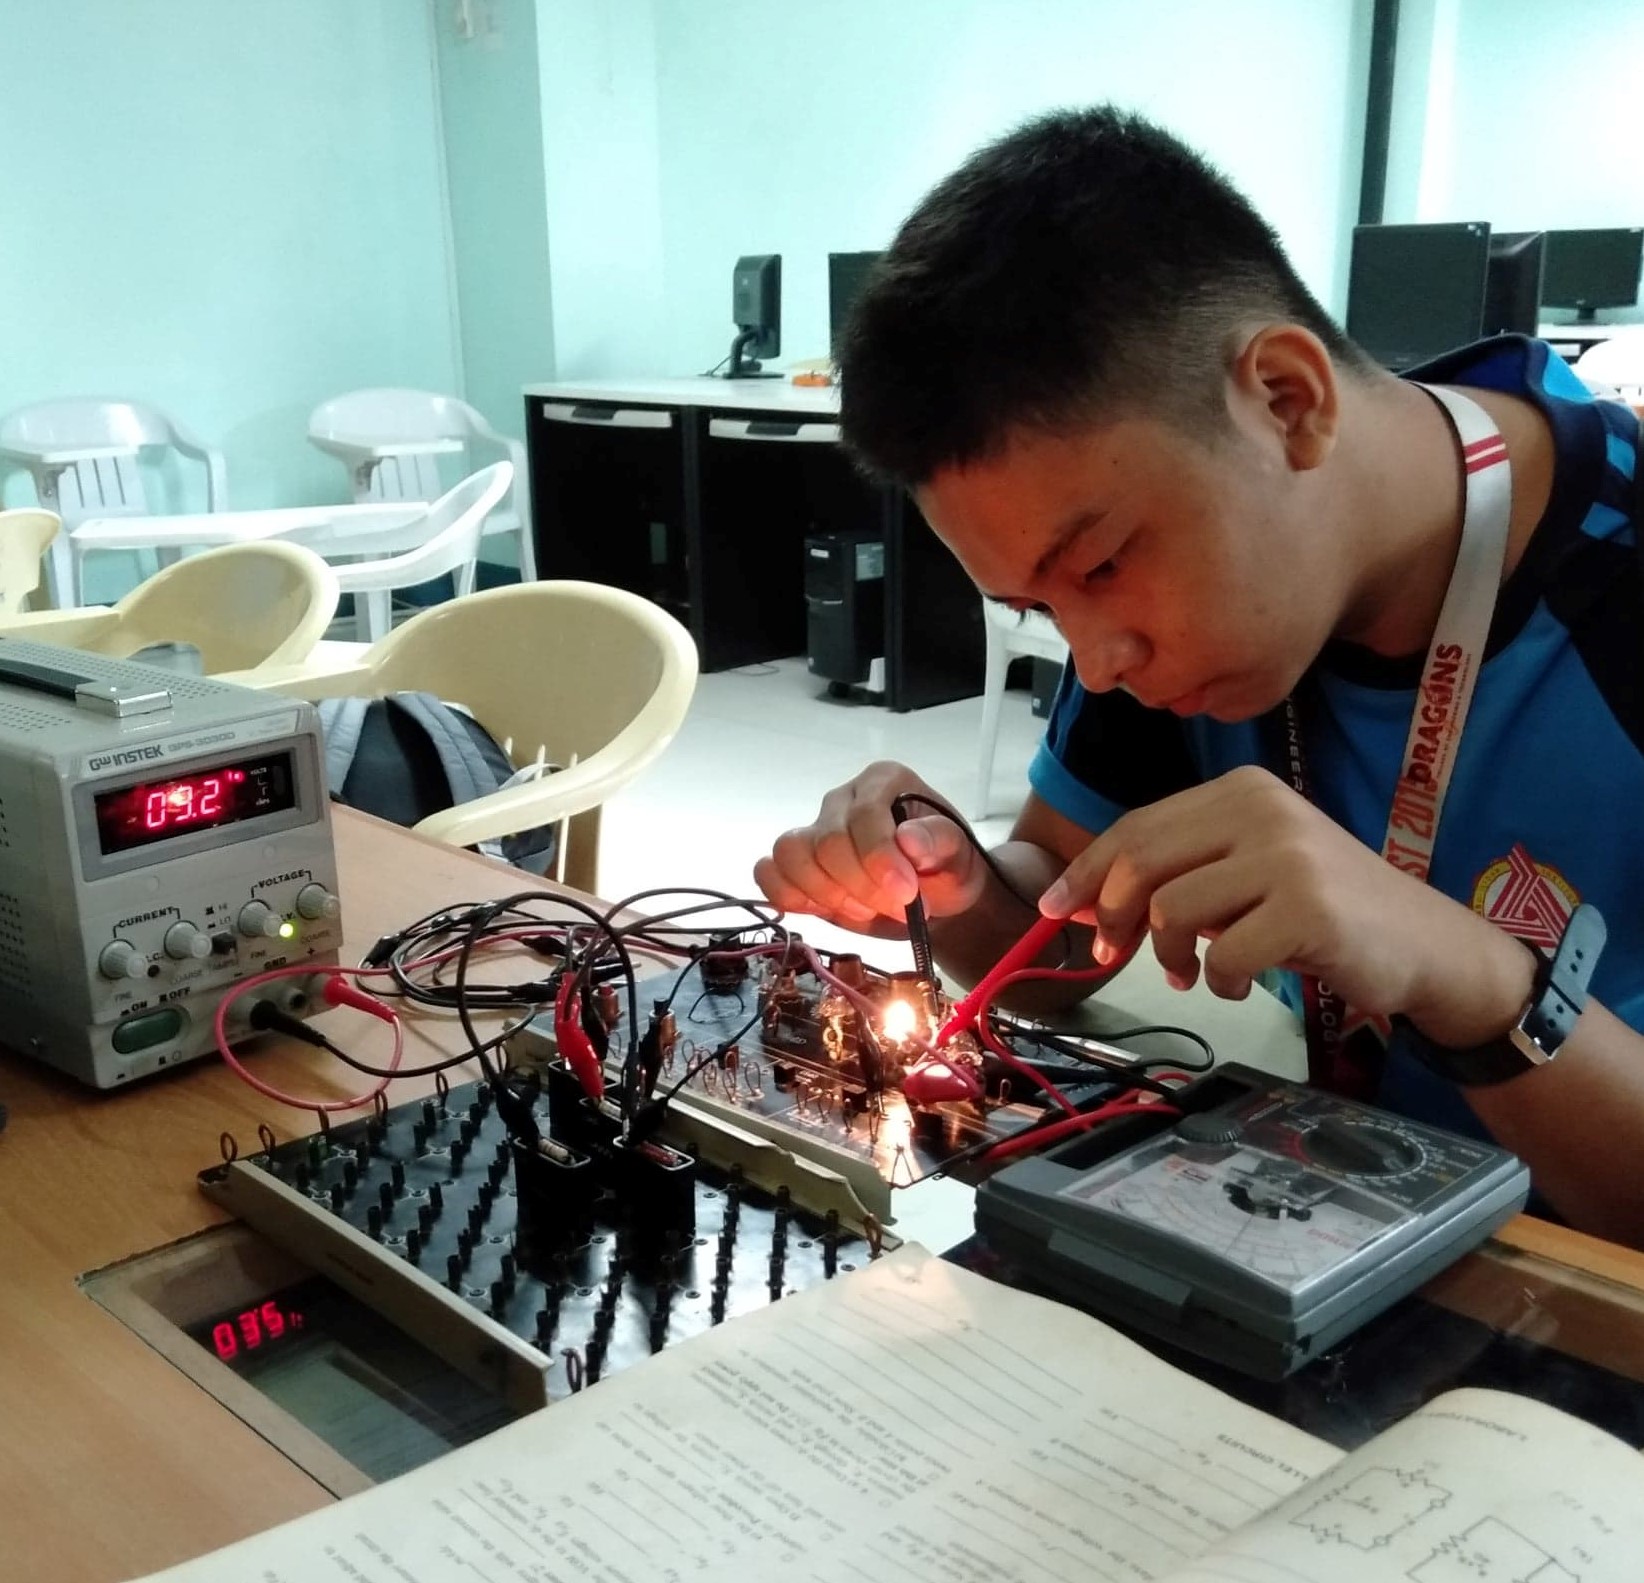 Bachelor of Engineering Technology Major in Electronics Engineering Technology